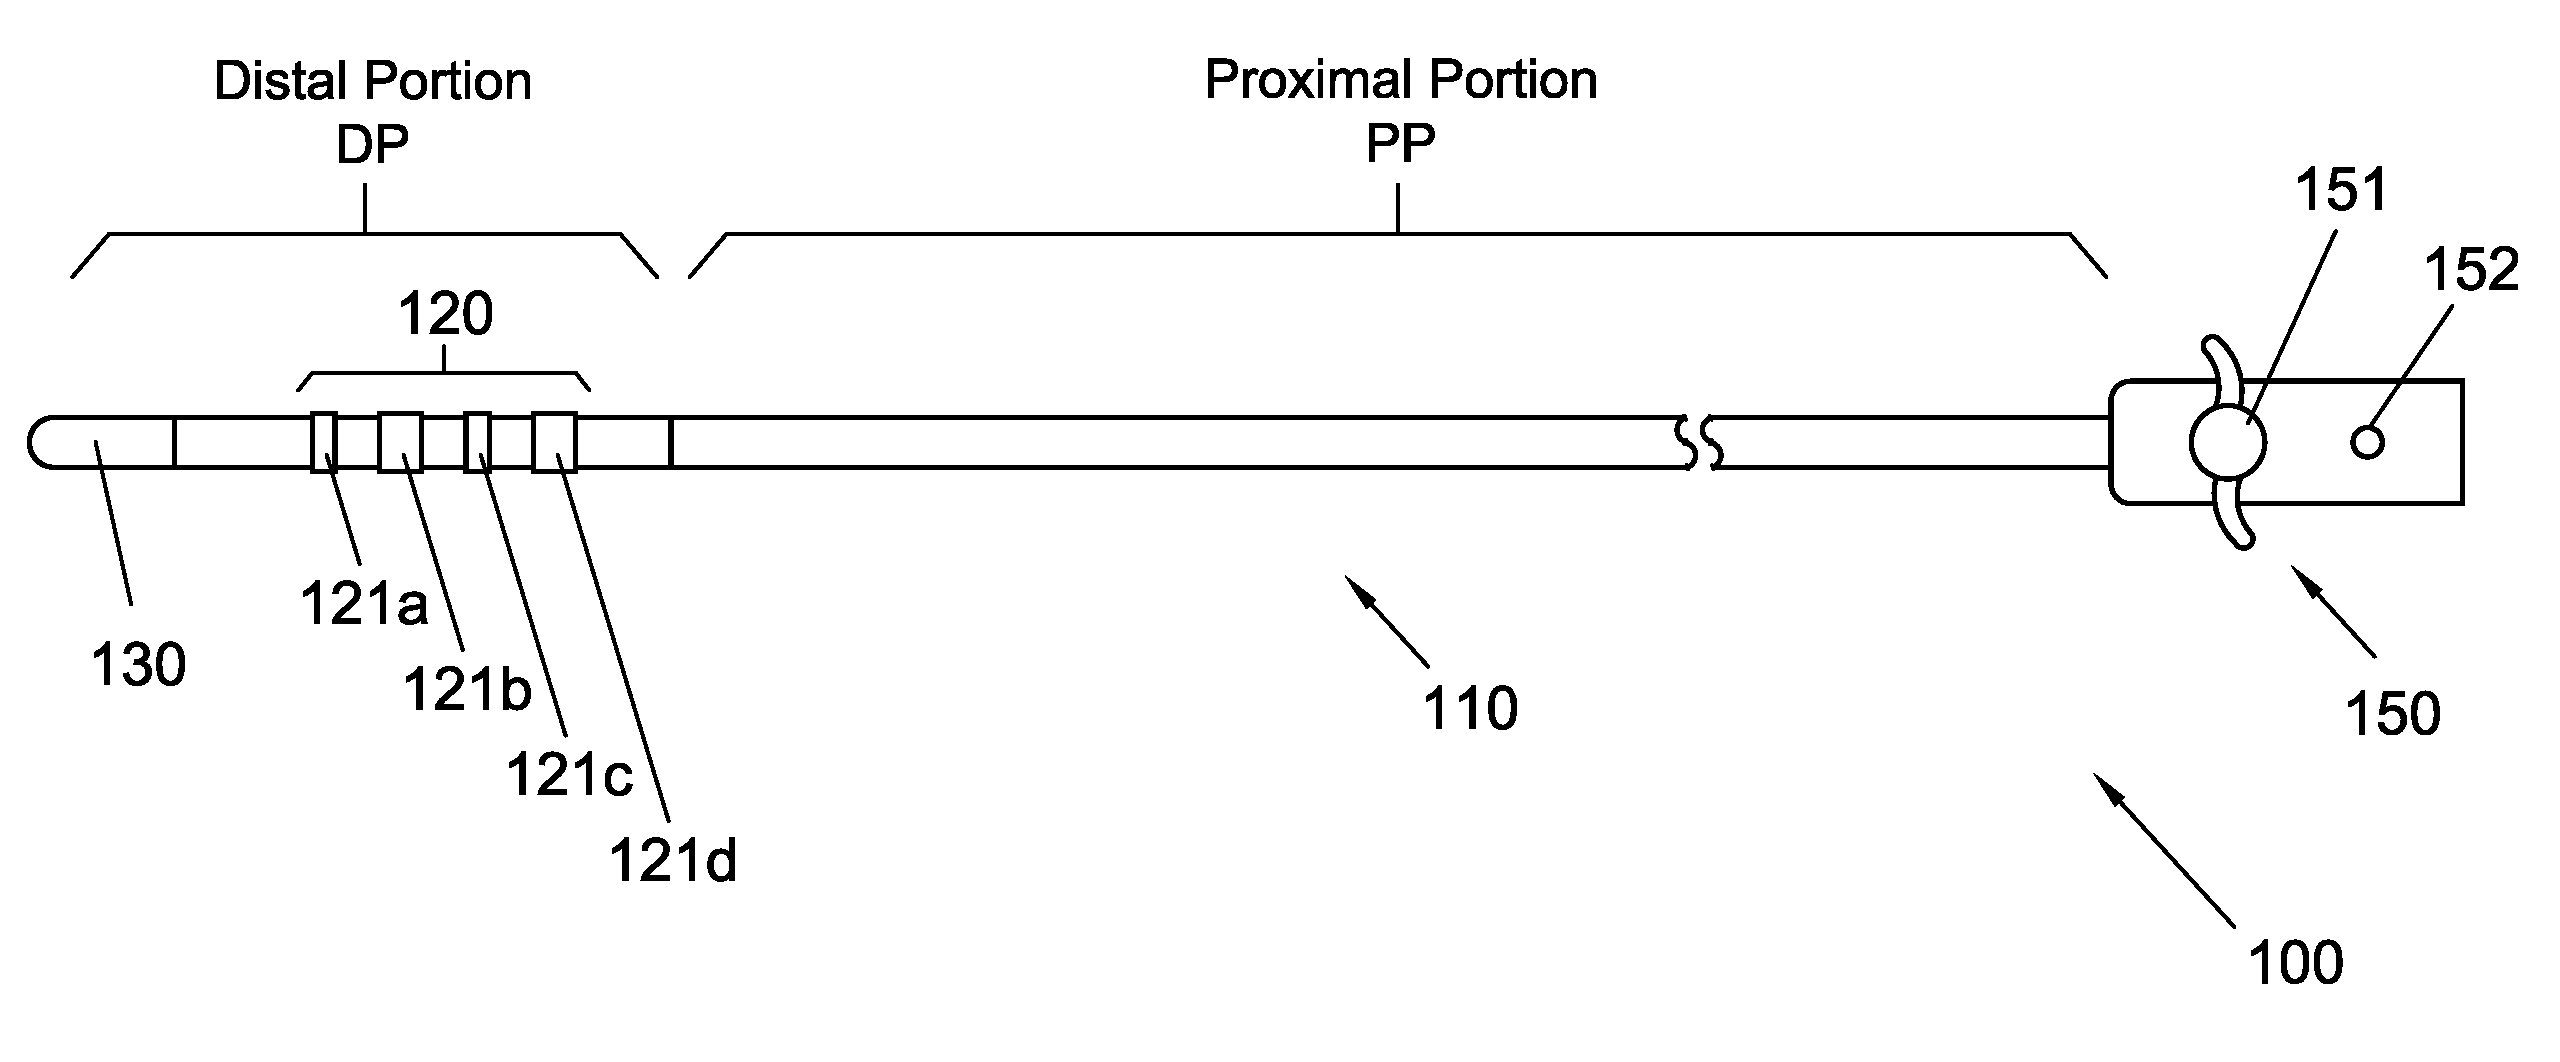 Irrigated Ablation Catheter System and Methods